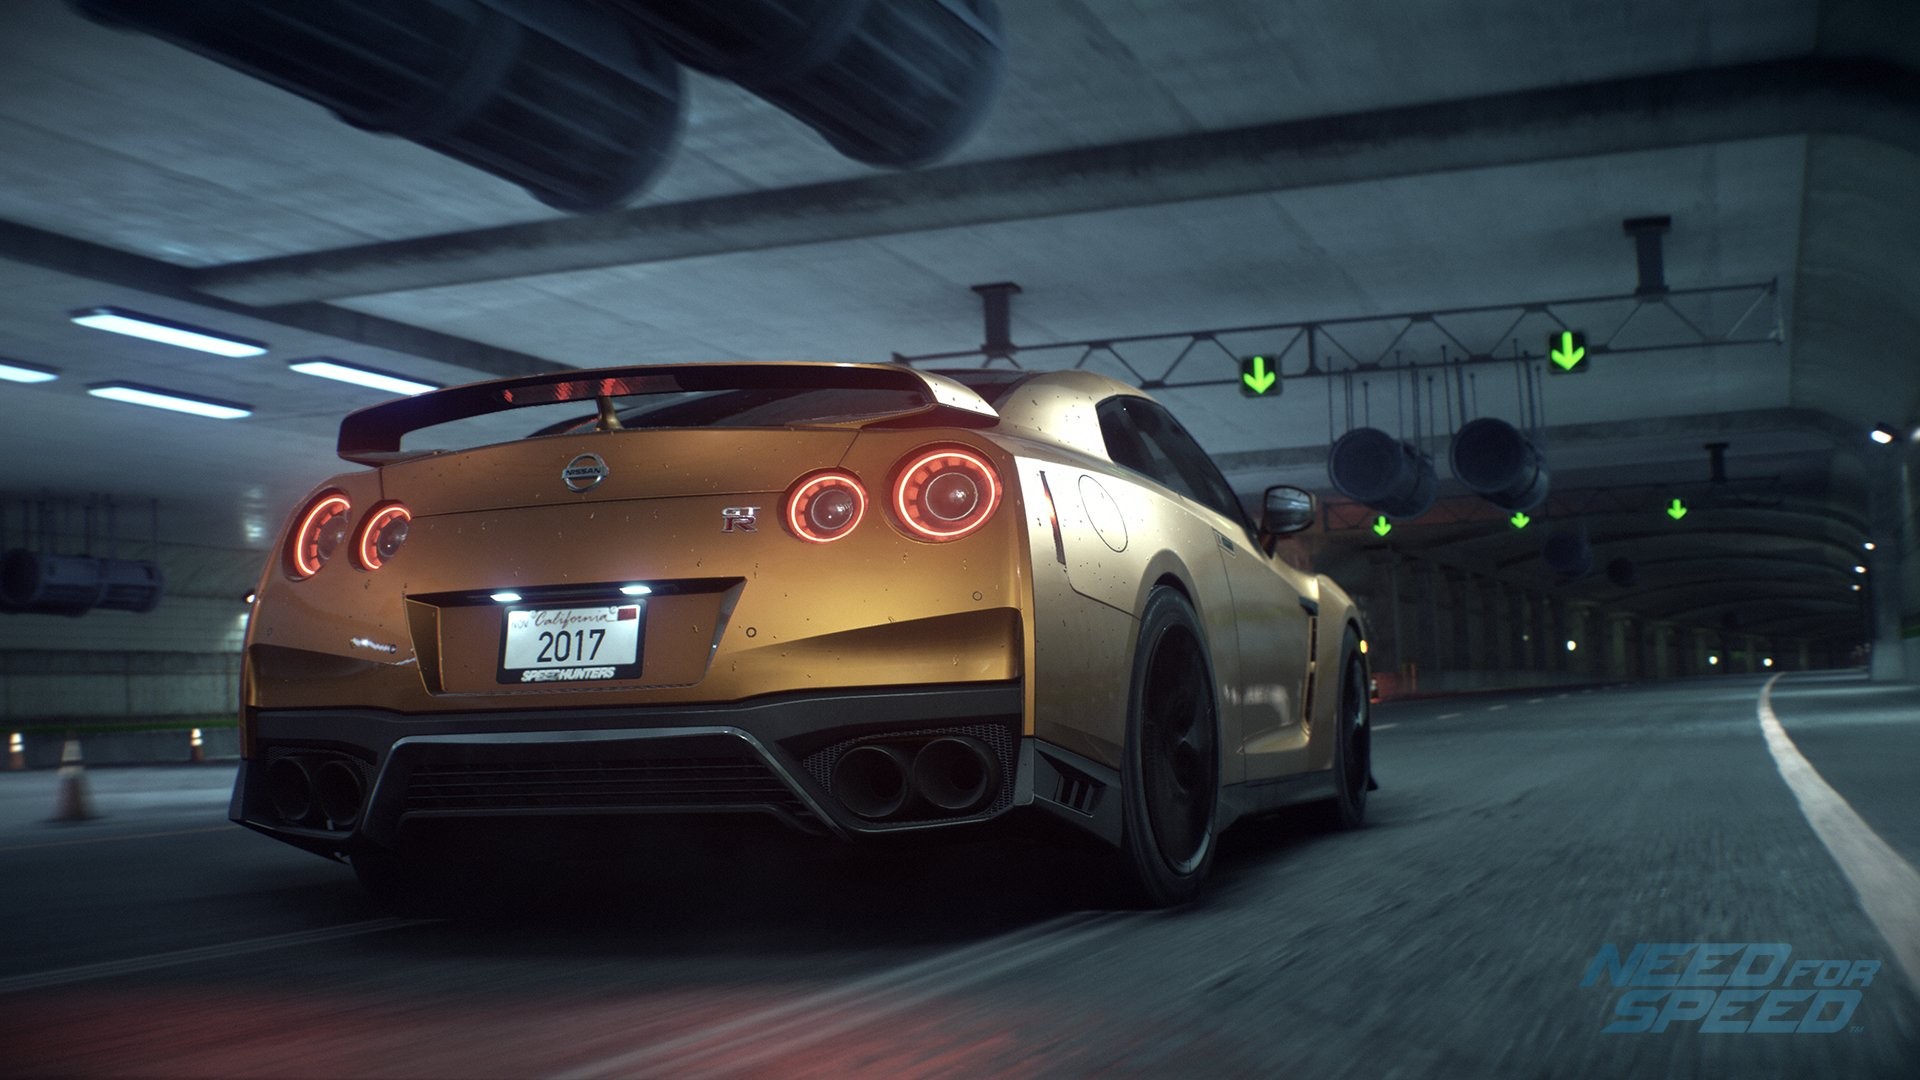 need For Speed 2016, Need For Speed, Car, PC Gaming, Nissan, Nissan GT R Wallpaper